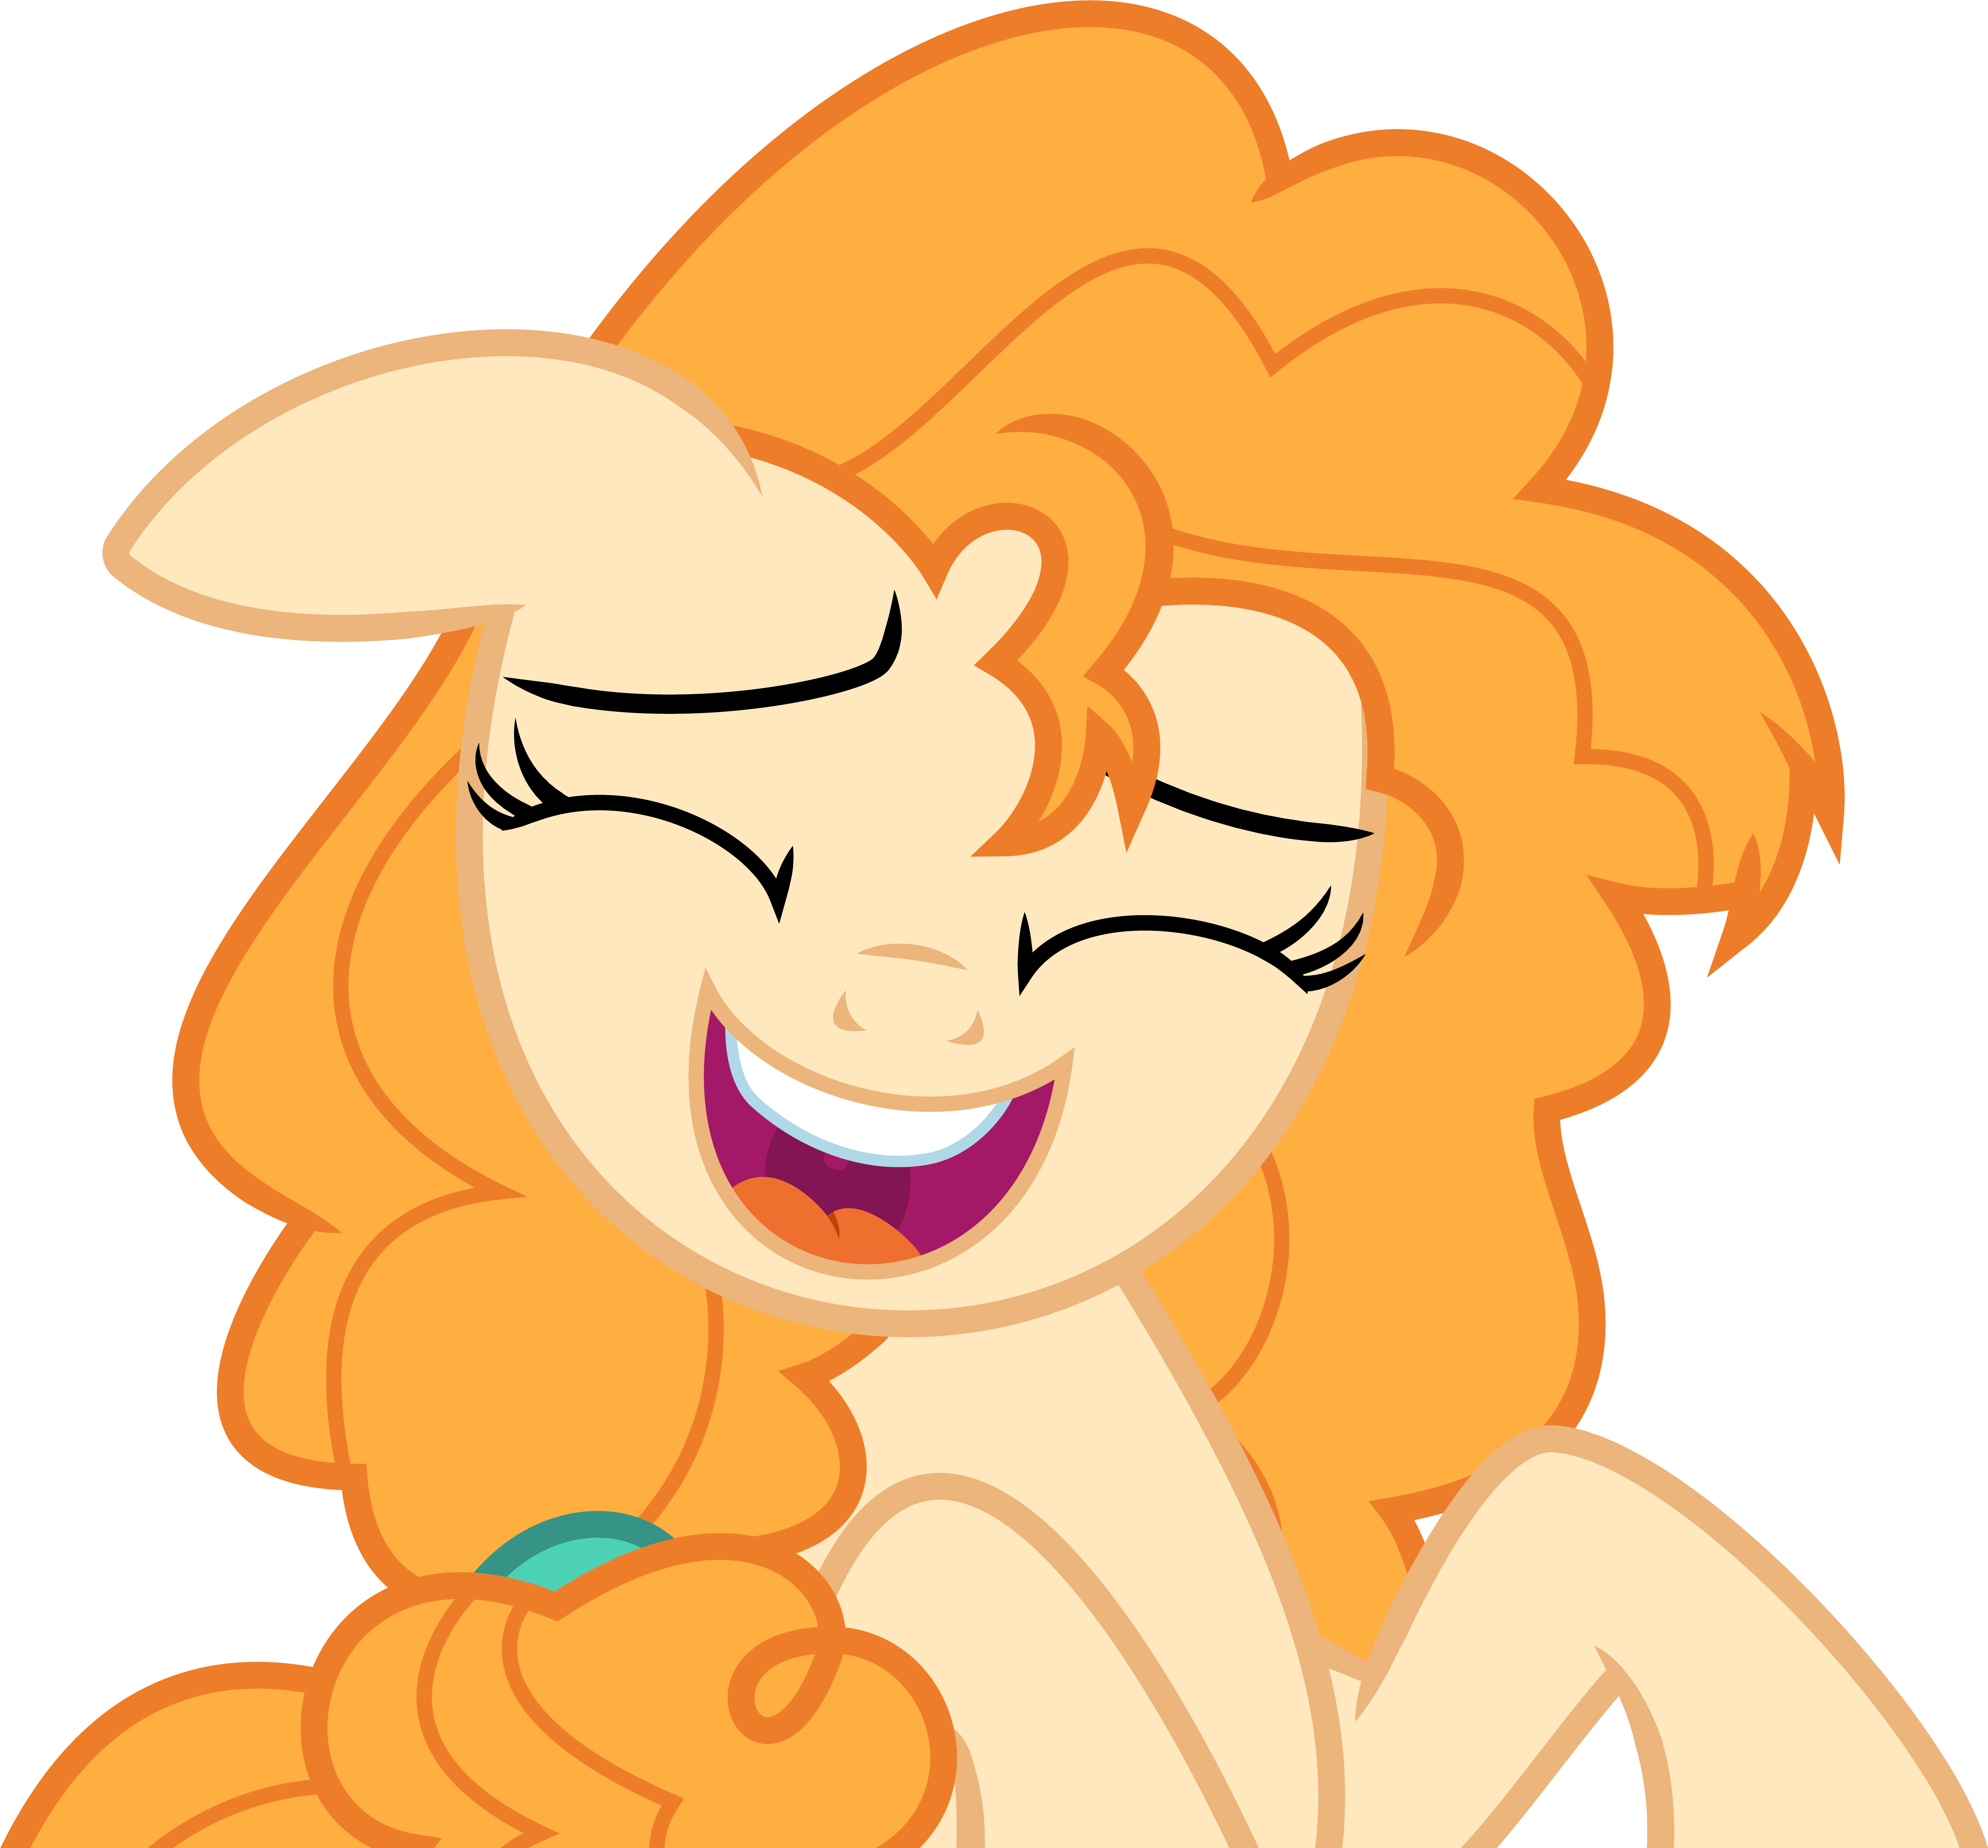 Pear Butter Laughing By Cloudyskie Pear Butter Laughing - Pear Butter Laughing By Cloudyskie Pear Butter Laughing (7247x6726)